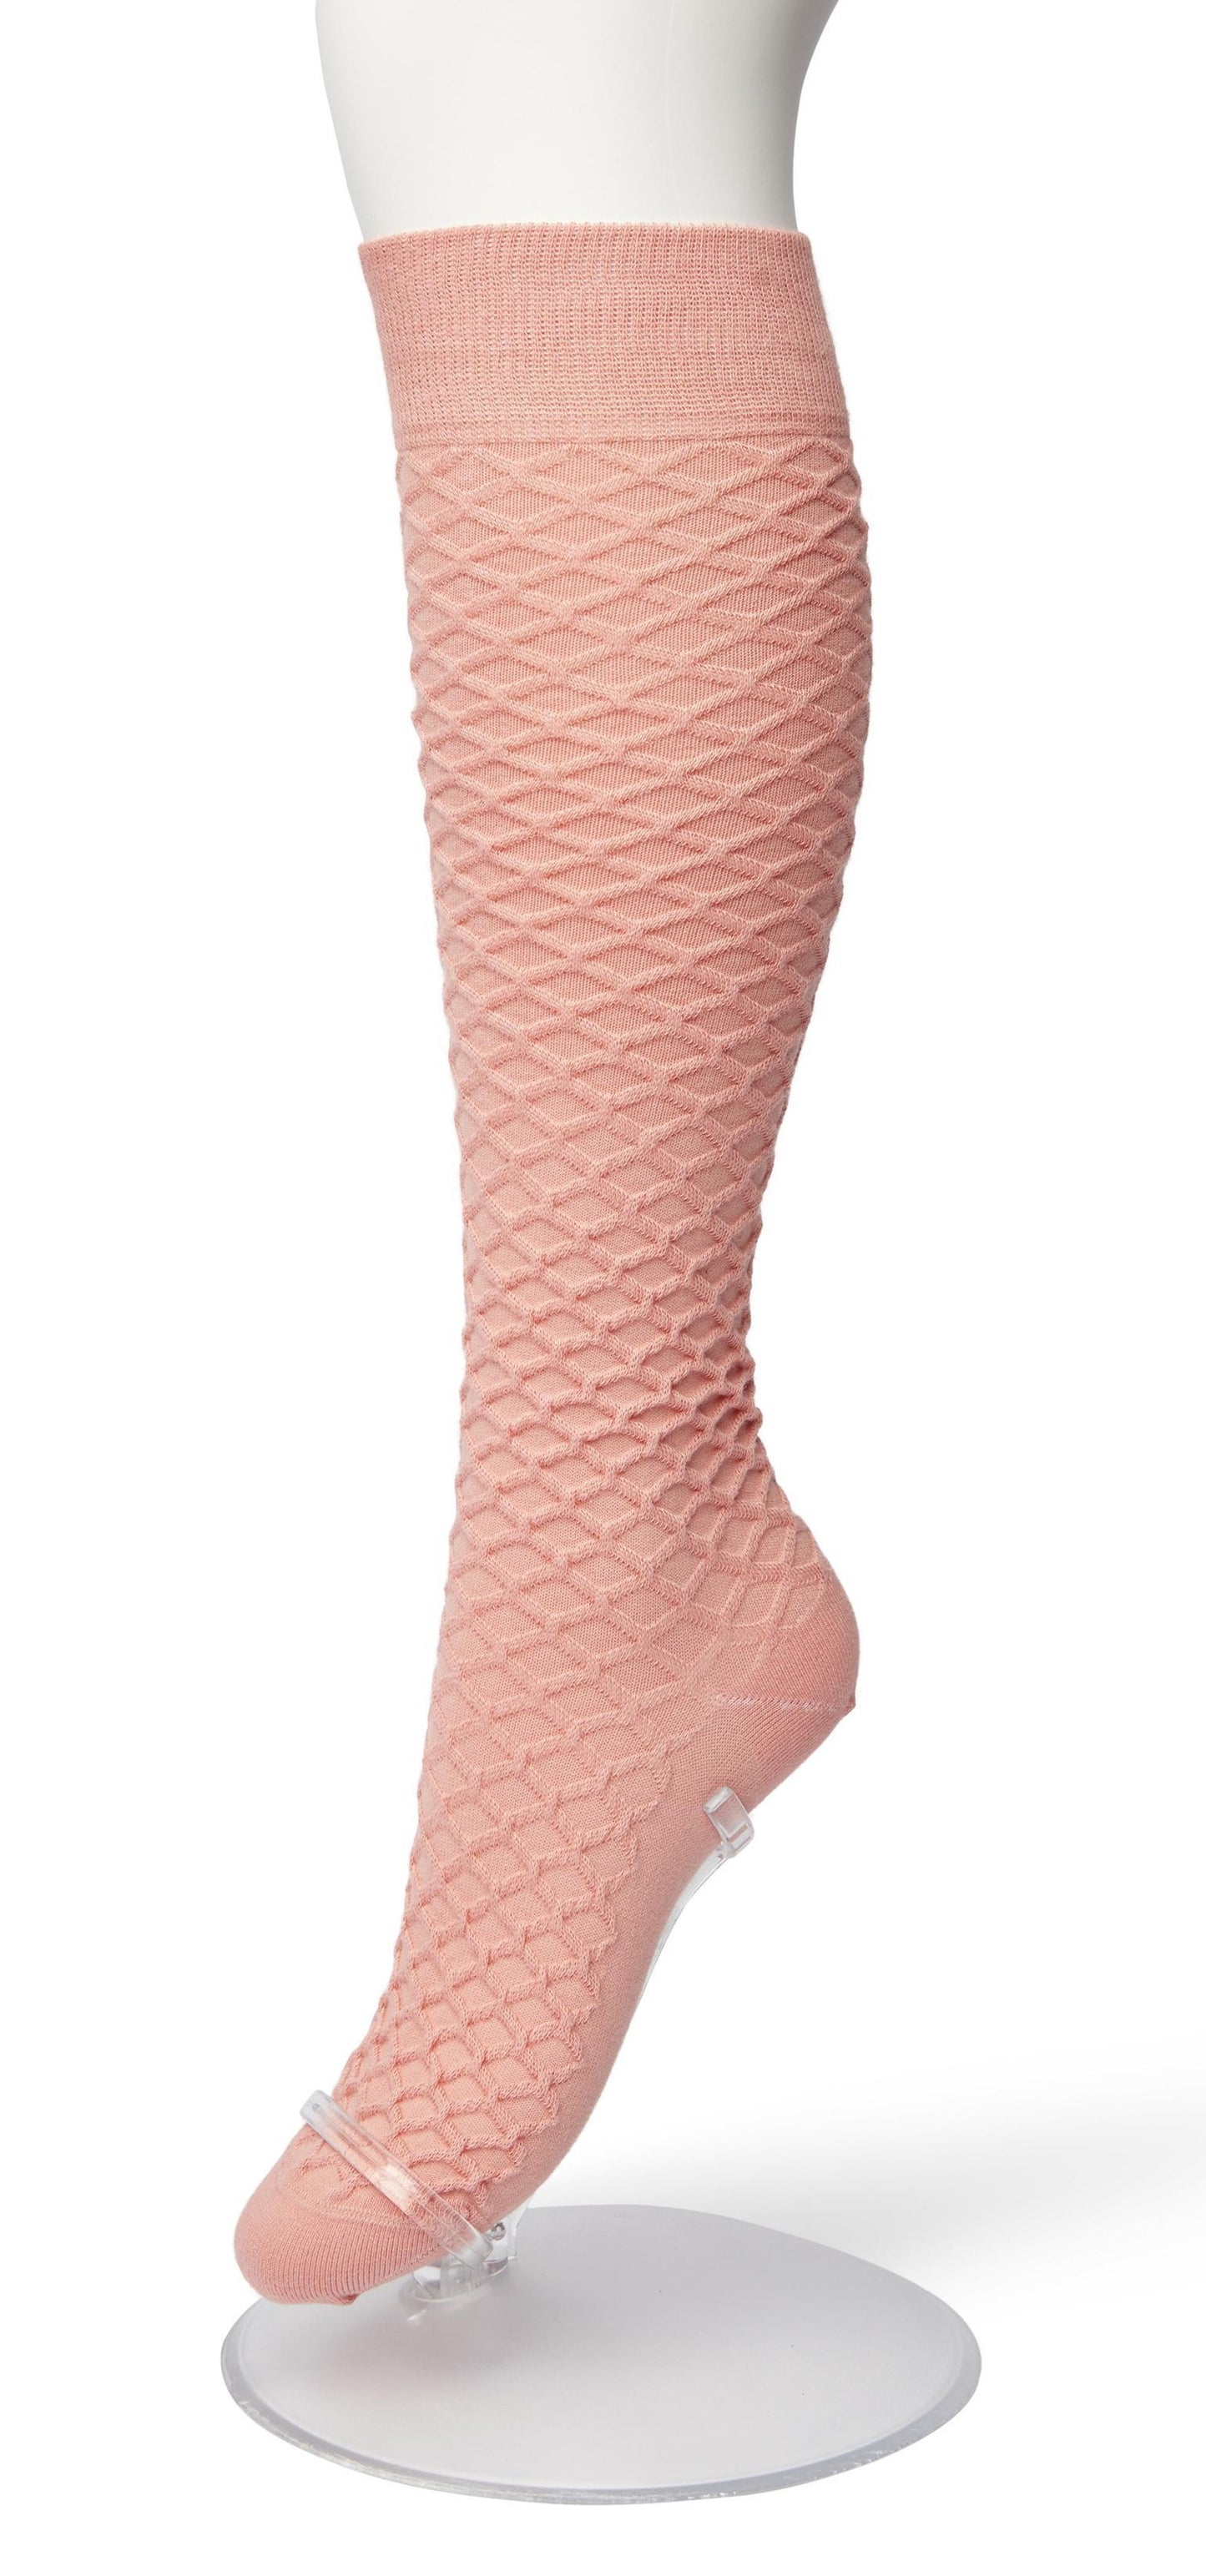 Bonnie Doon BP211506 Cable Knee-highs - Pale Pink (almost apricot) soft and warm knitted knee-high socks with a criss-cross diamond textured pattern